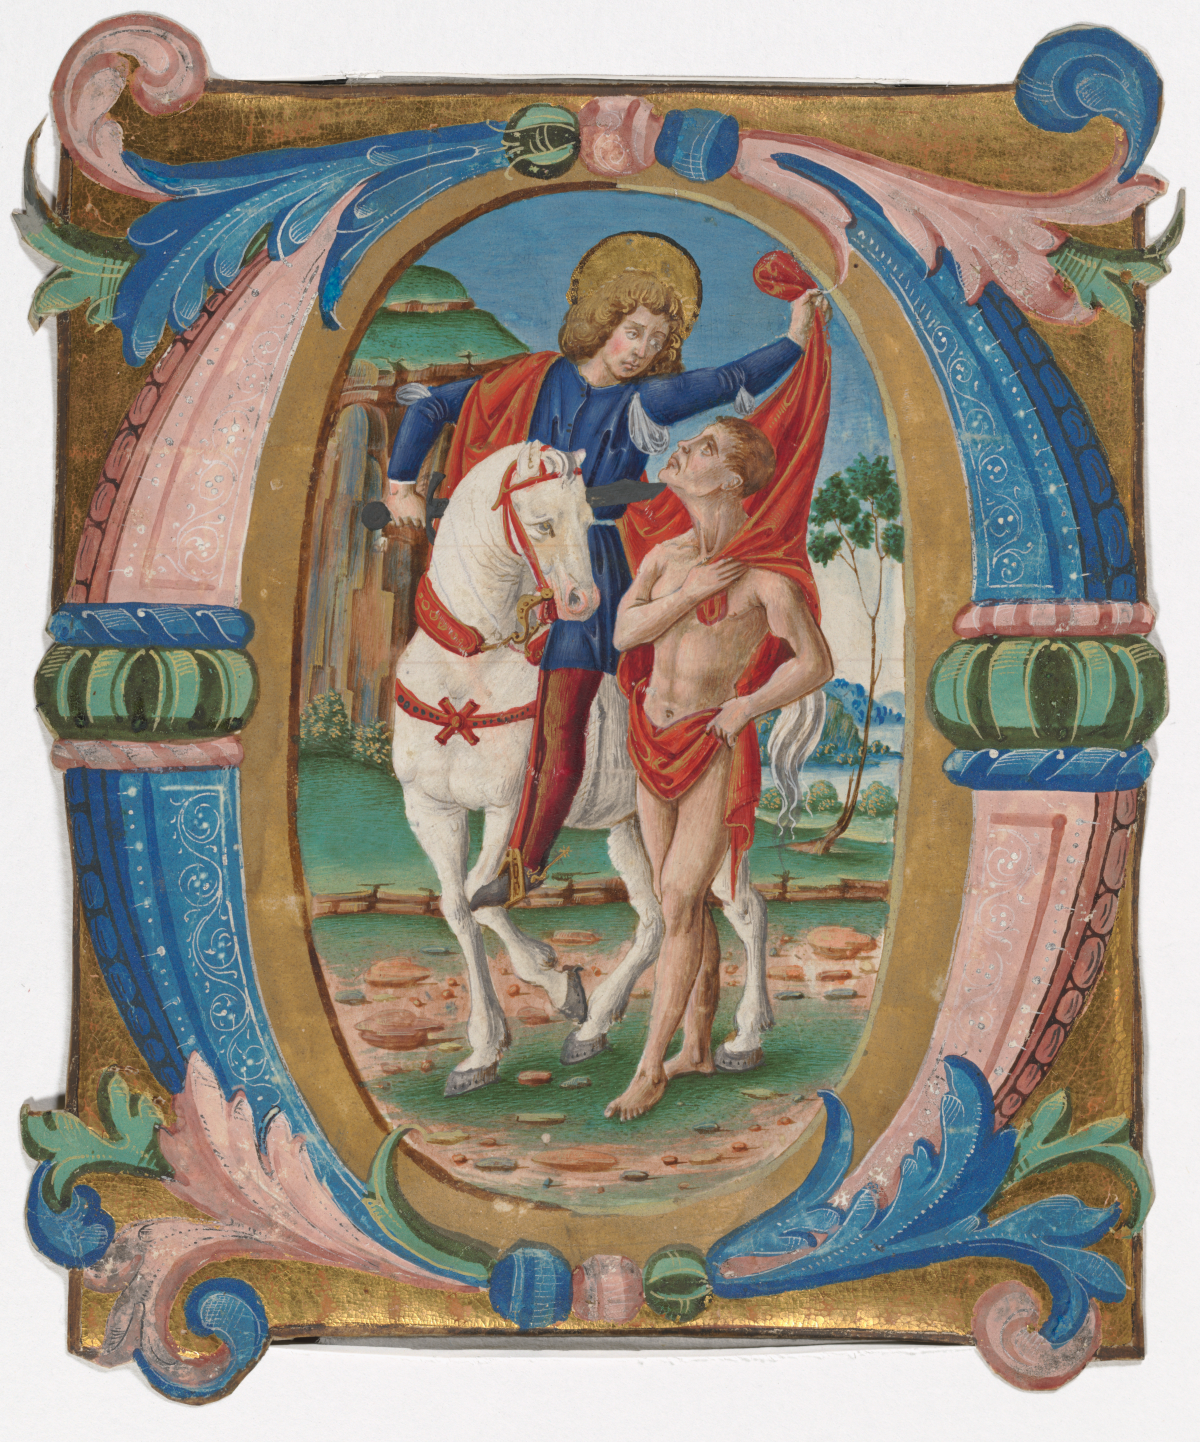 A large very ornate illuminated letter "O". The letter is drawn in gold (the original is guilded and shiny, the digital copy is matt). Surrounding the letter are columns of blue and pink. Leaves and fronds decorate the top and bottom. Within the middle of the "O" is a figure in a blue and red robe riding a white horse. He has a halo on his head. He is leaning off of his horse to drape his red cloak over a naked man walking alongside his horse. The men are looking at each other.